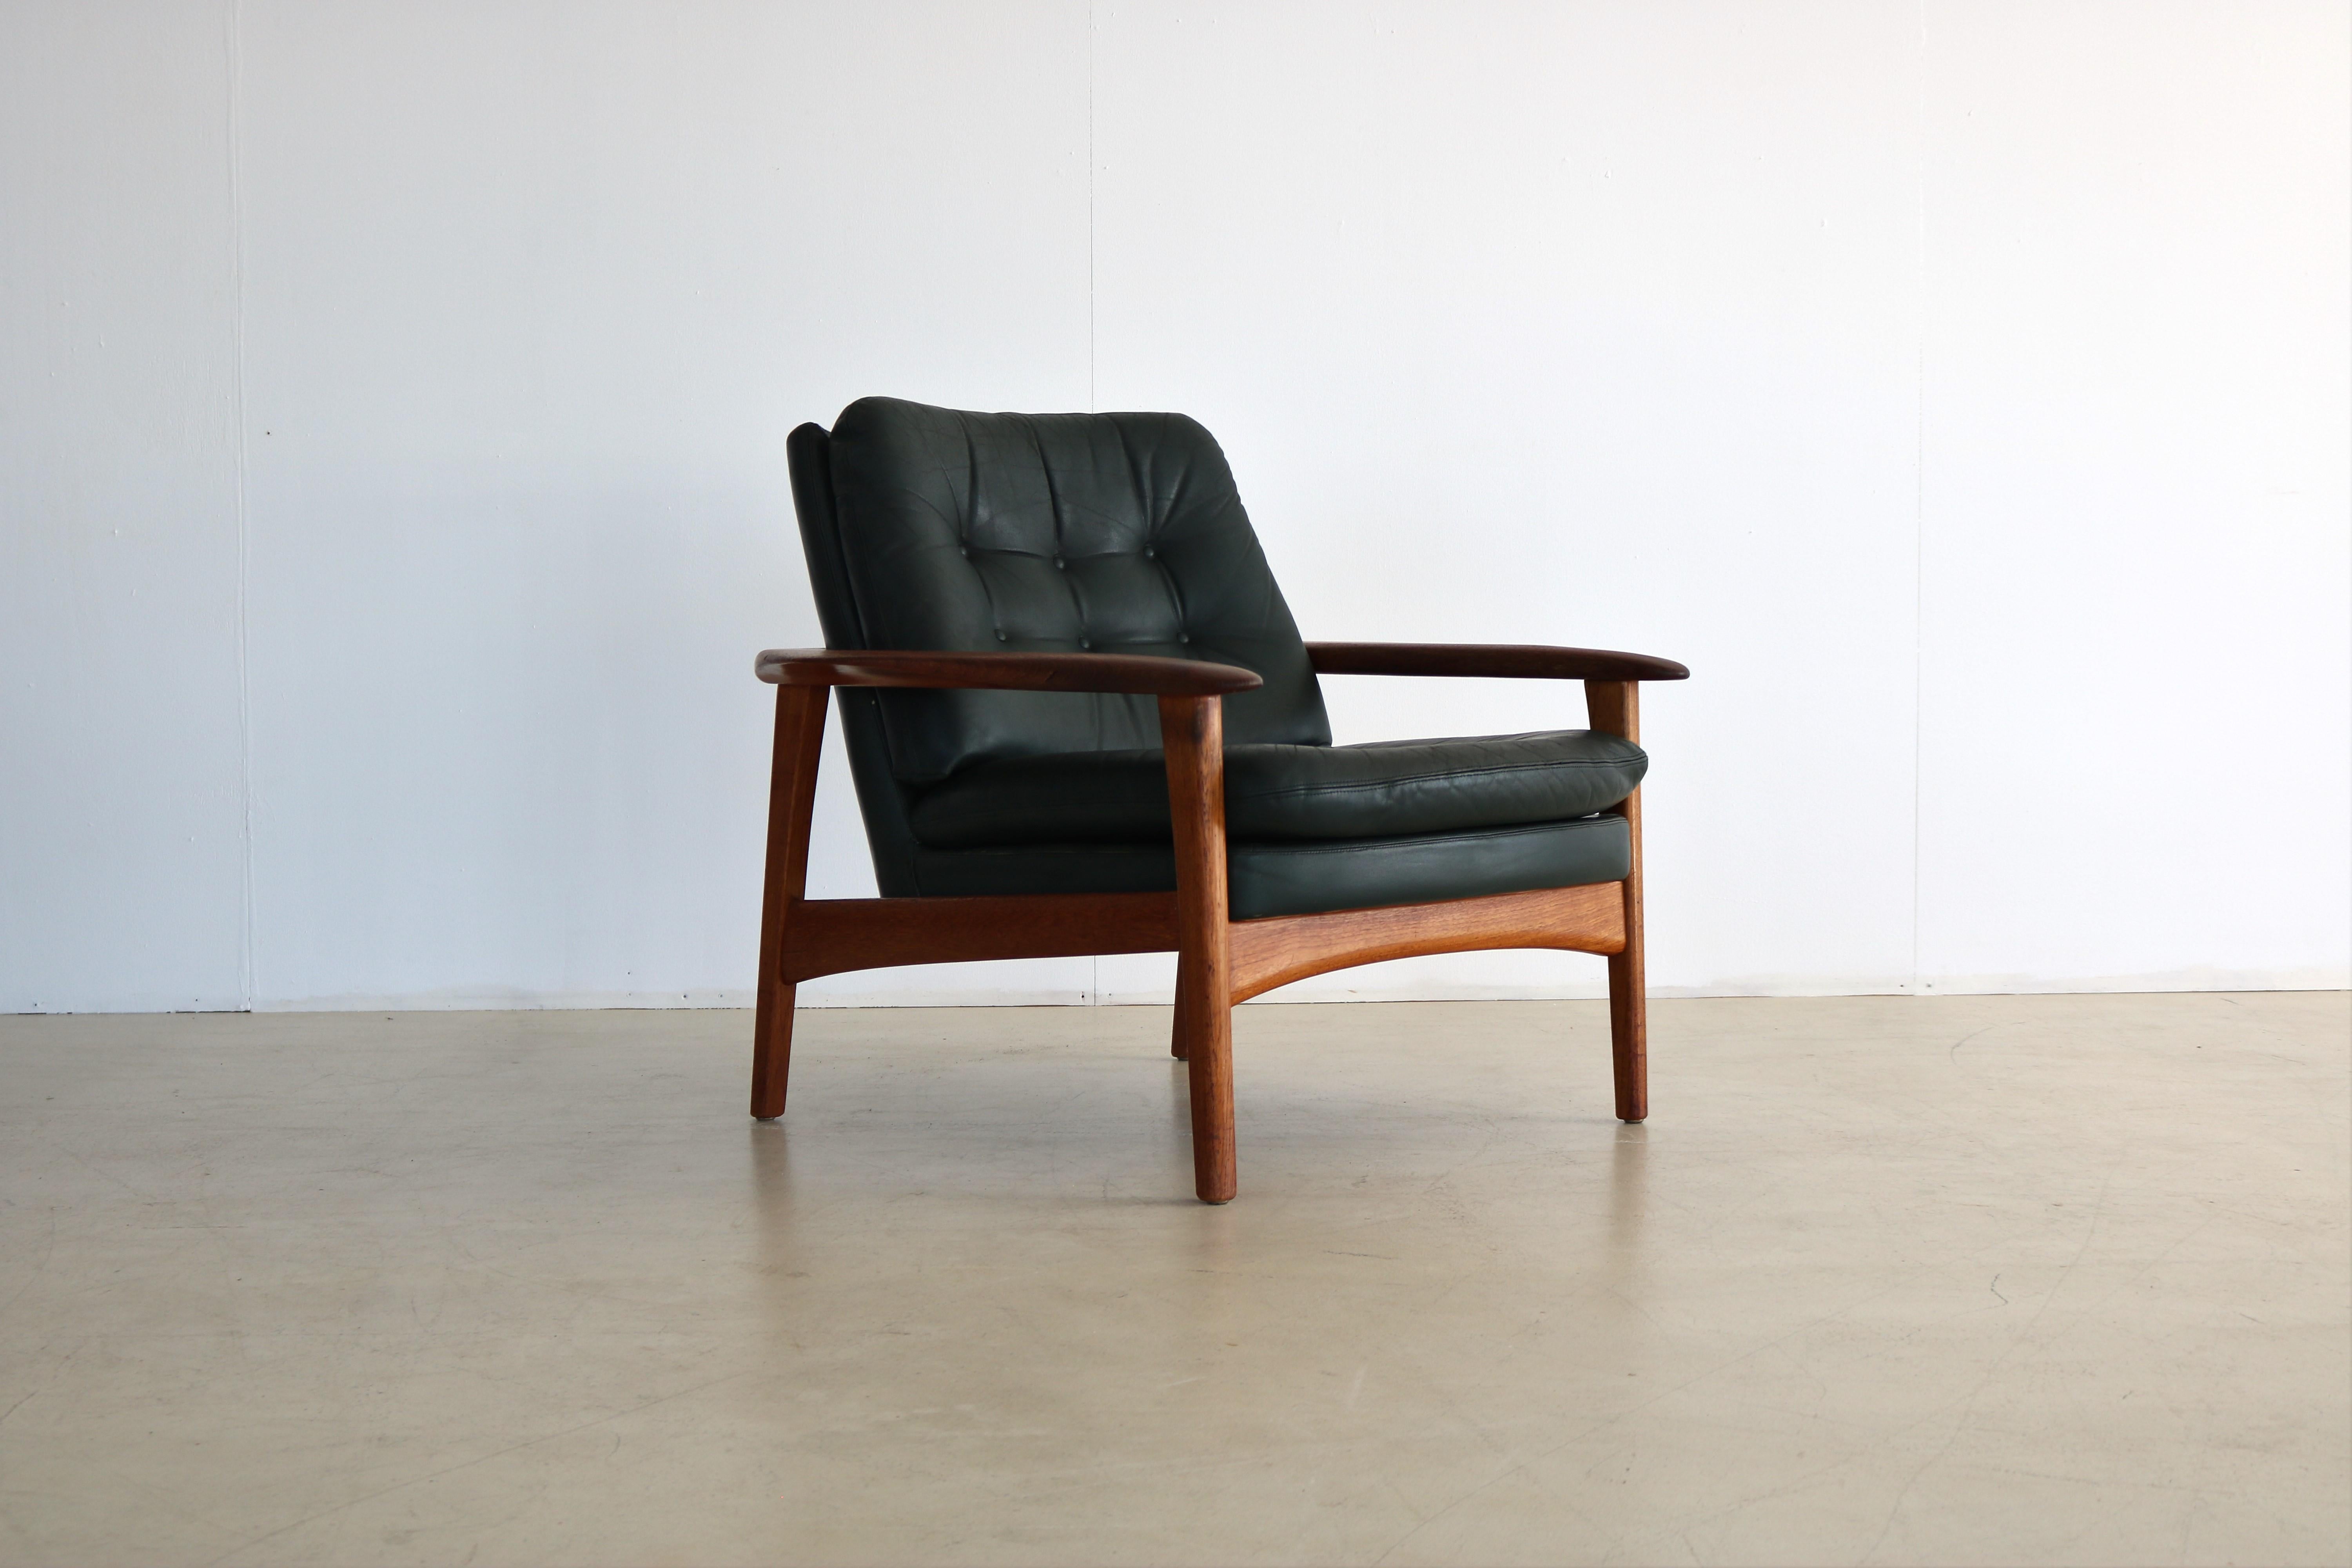 Vintage easy chair teak leather 60s armchair

period 60s
designs unknown
conditions good light signs of use patina leather
Size 80 x 90 x 85 (hxwxd)

Details teak; leather;

Article number 1709.